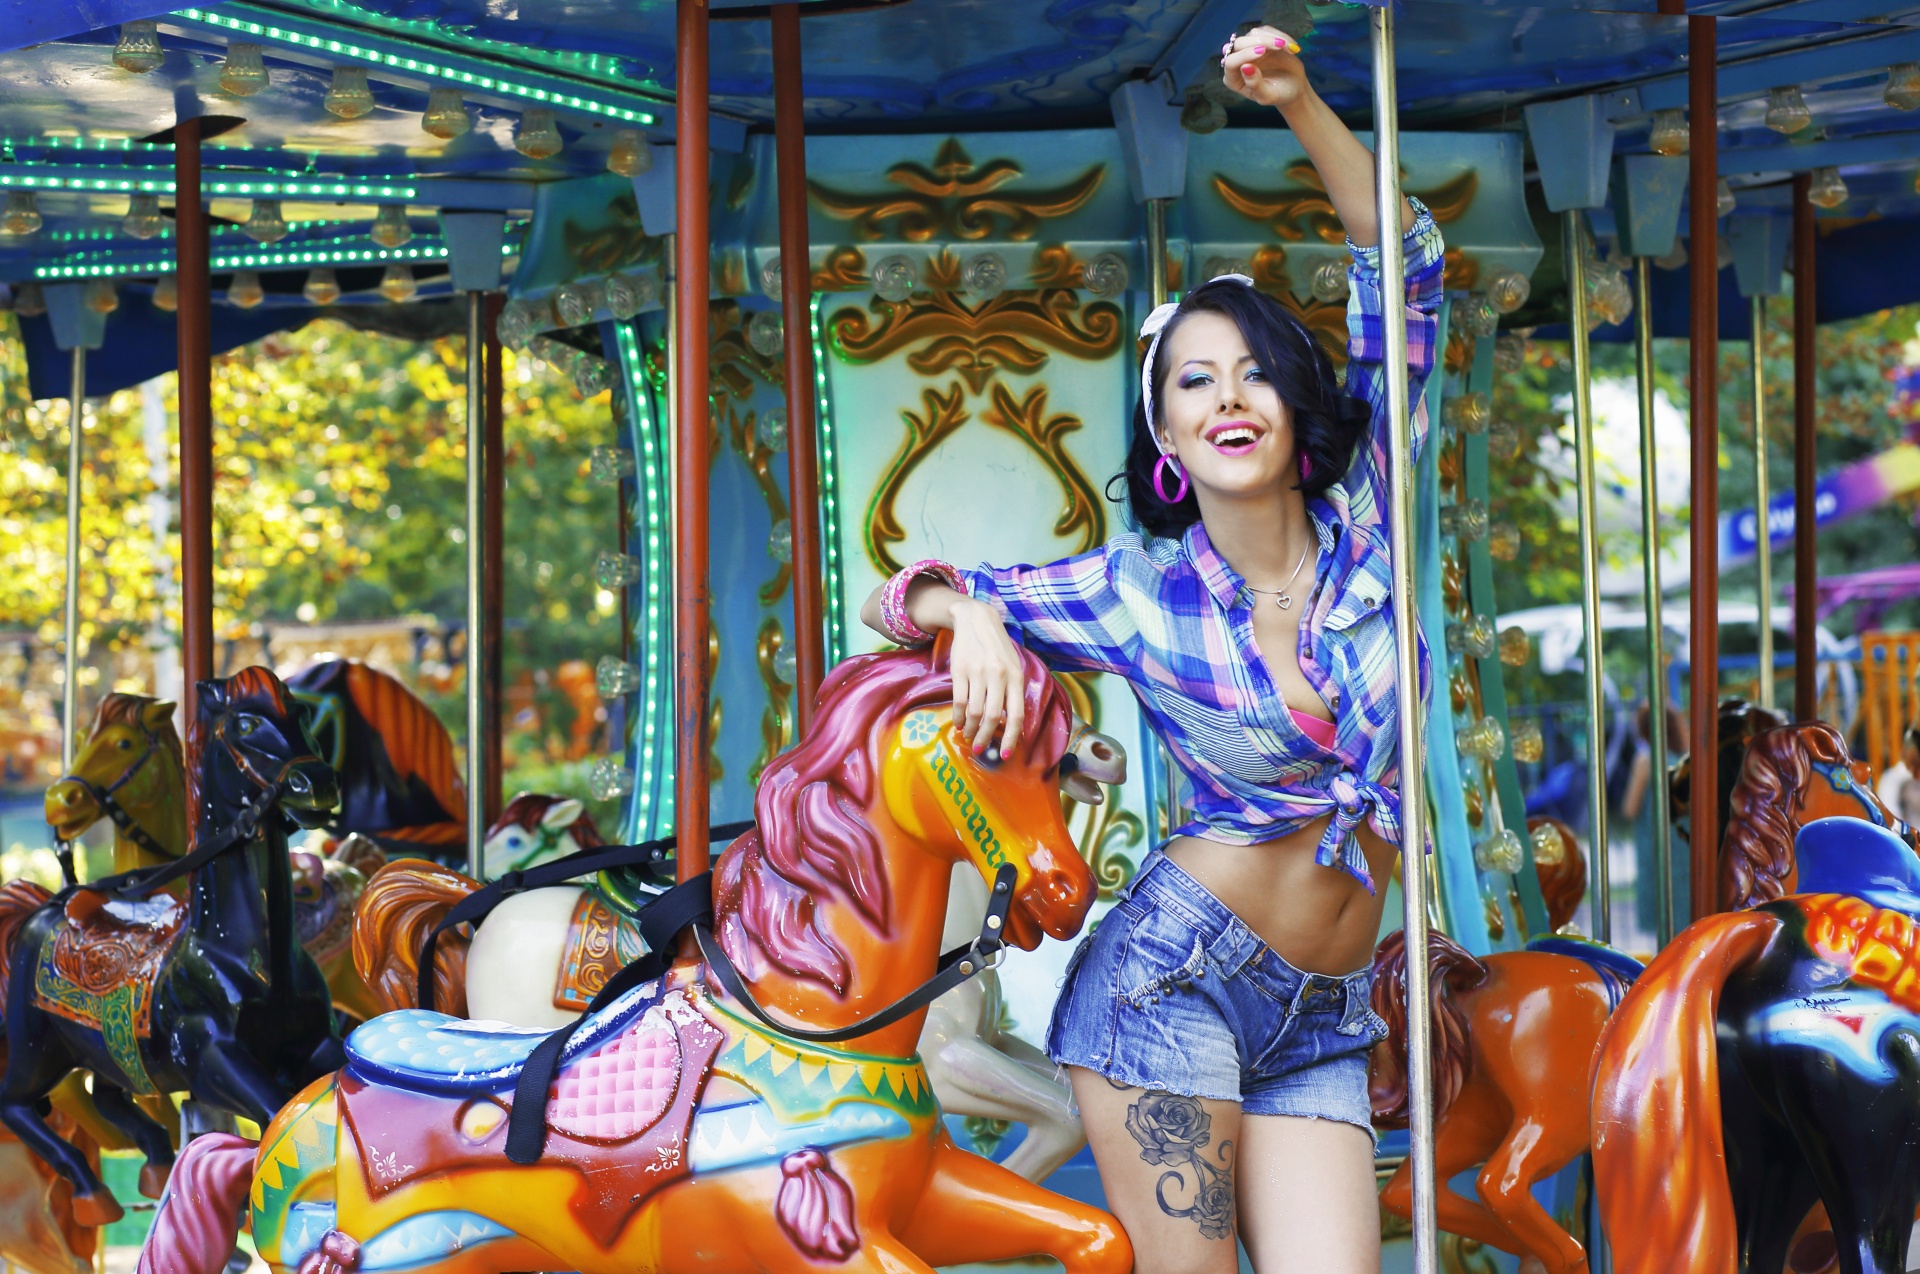 young-woman-on-a-carousel-free-stock-photo-public-domain-pictures